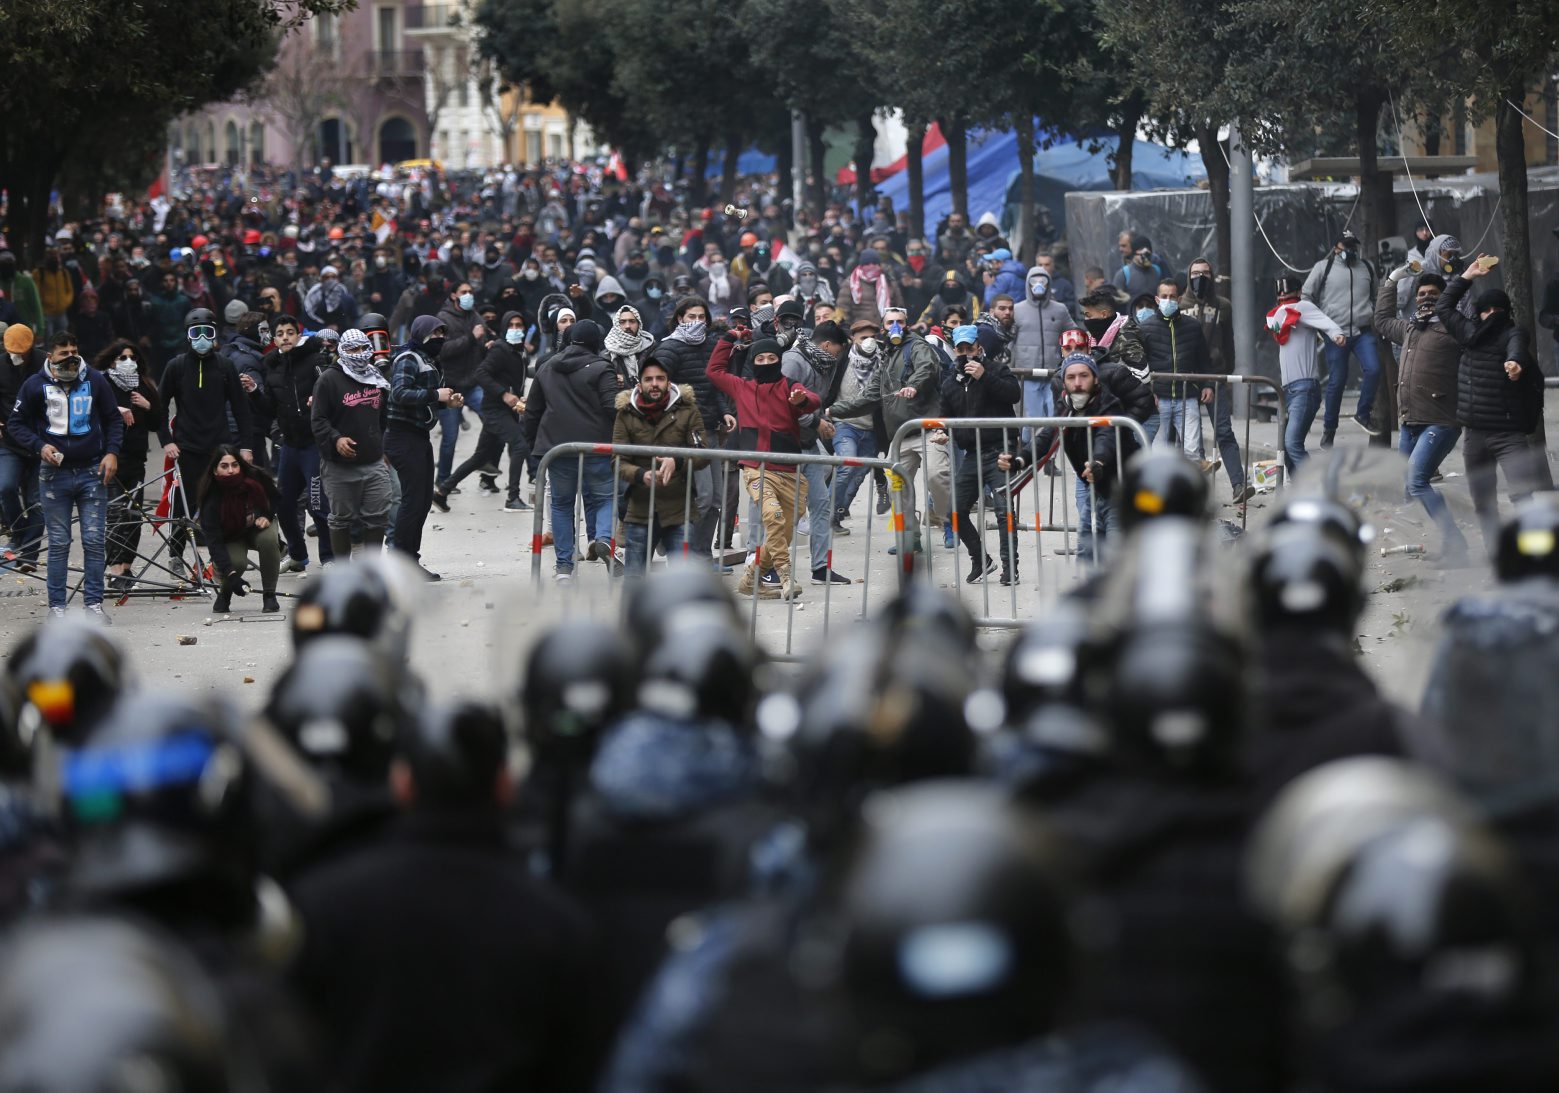 Anti-government protesters clash with riot police in downtown Beirut, Lebanon,Tuesday, Feb. 11, 2020. Lebanese security forces fired tear gas to disperse thousands of protesters near the parliament building in Beirut, where the new Cabinet was expanding on its policy statement on Tuesday ahead of a confidence vote by lawmakers. (AP Photo/Hussein Malla) Lebanon Protests